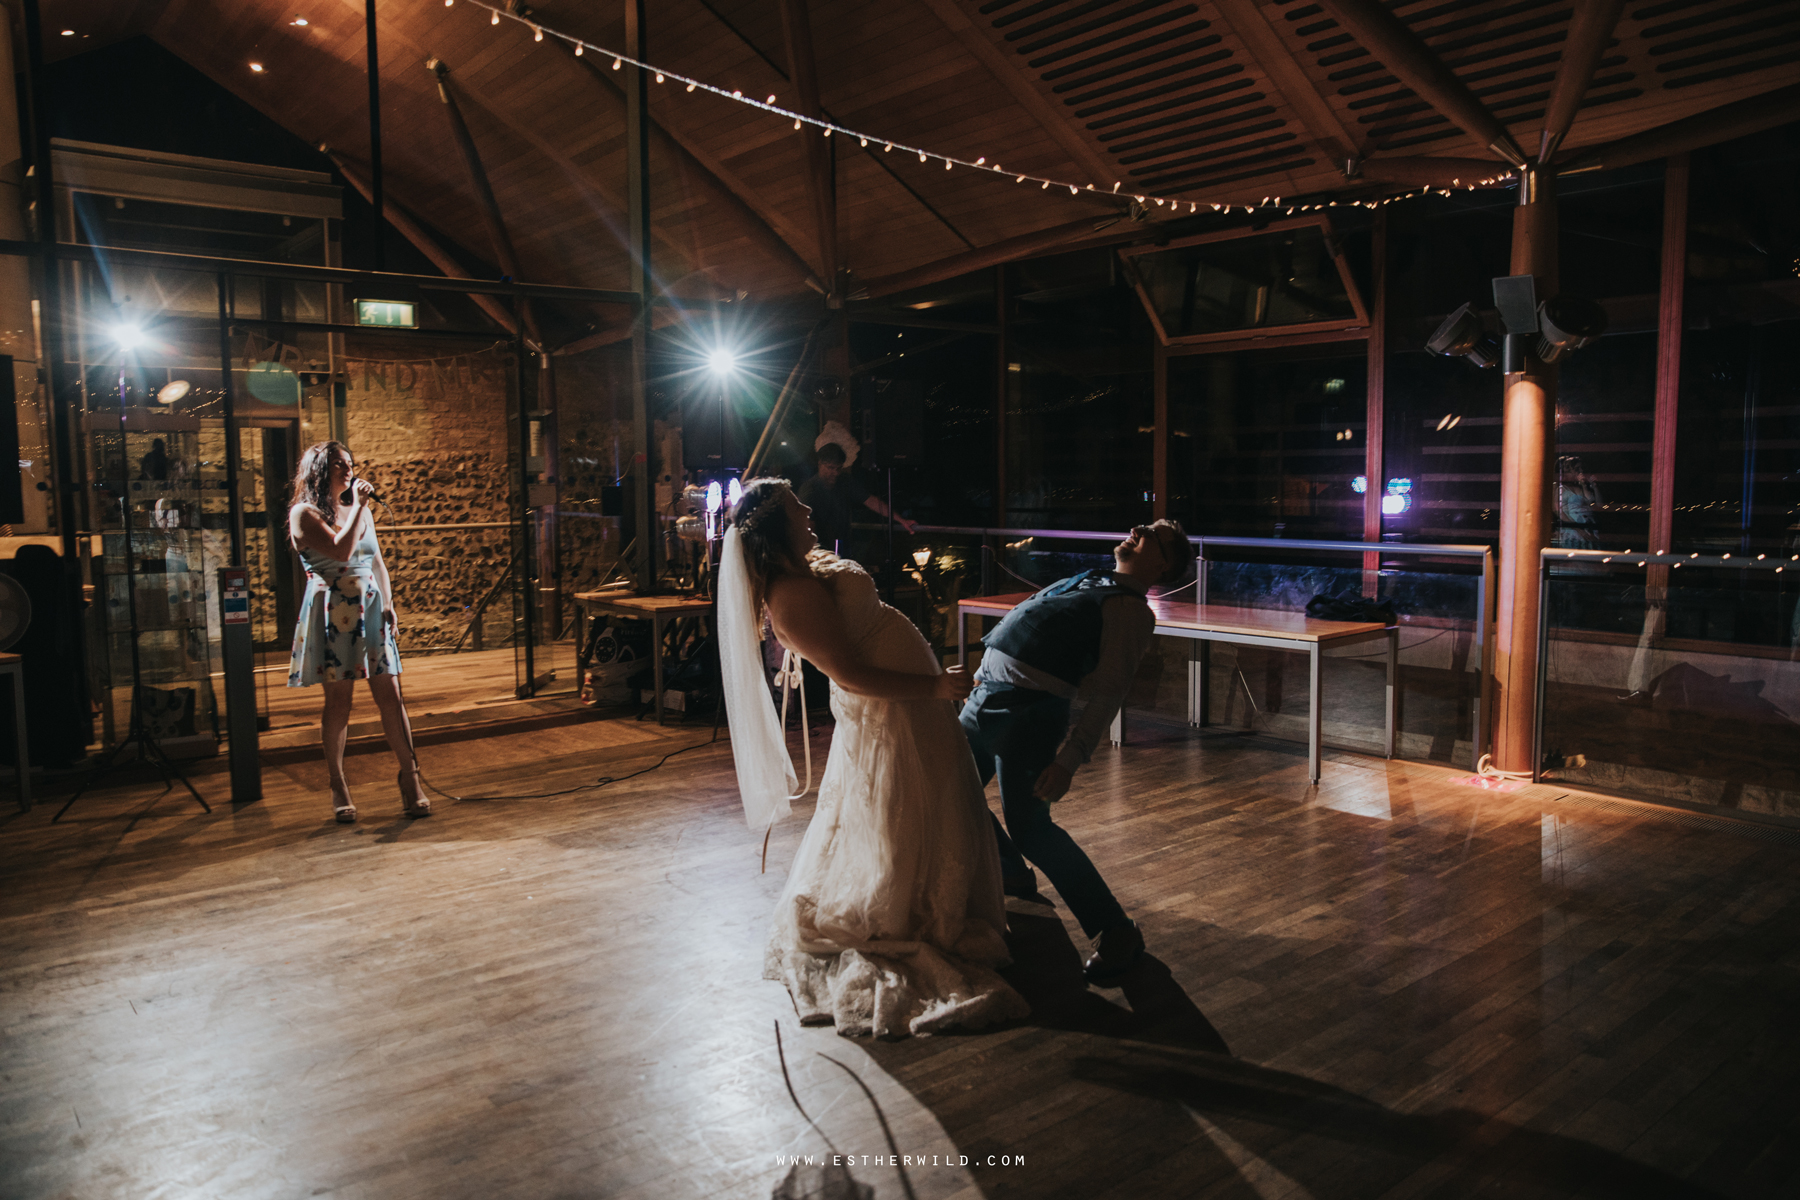 Norwich_Castle_Arcade_Grosvenor_Chip_Birdcage_Cathedral_Cloisters_Refectory_Wedding_Photography_Esther_Wild_Photographer_Norfolk_Kings_Lynn_3R8A3244.jpg